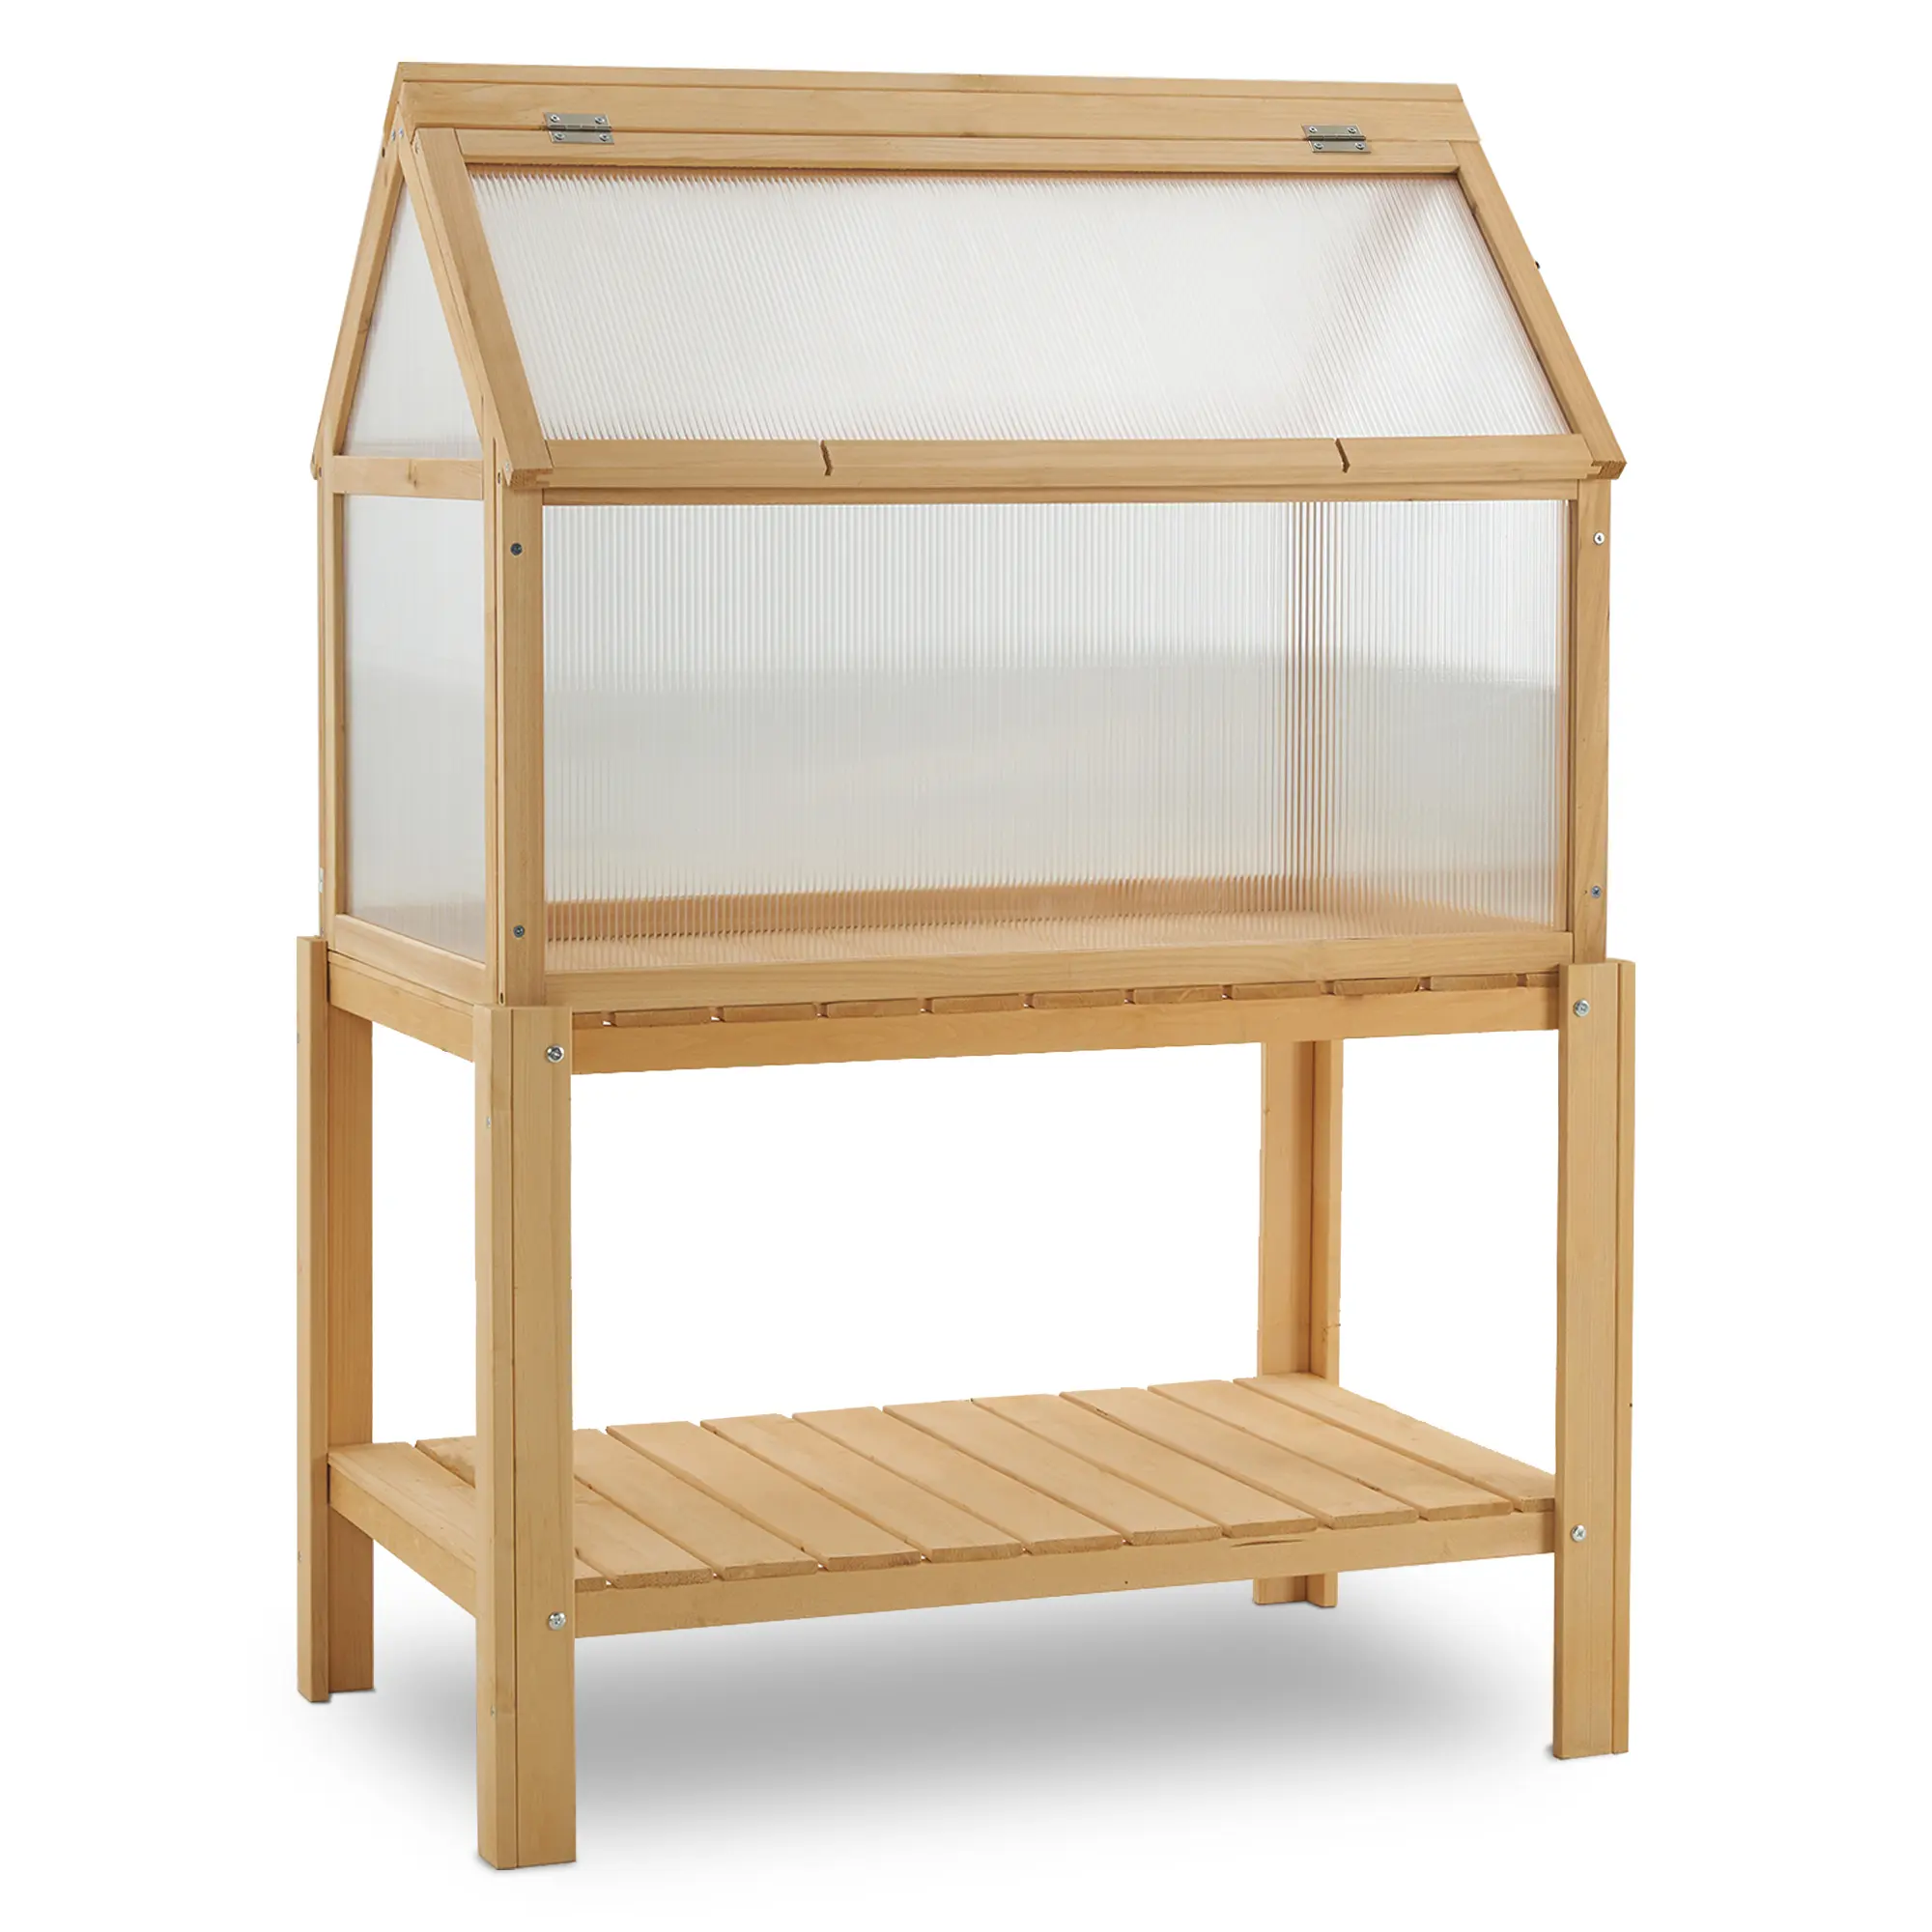 OTXIINXIIN Cold Frame Greenhouse Portable Wooden Greenhouse Raised Potted Plant Protection Box with Shelf for Outdoor Indoor Use